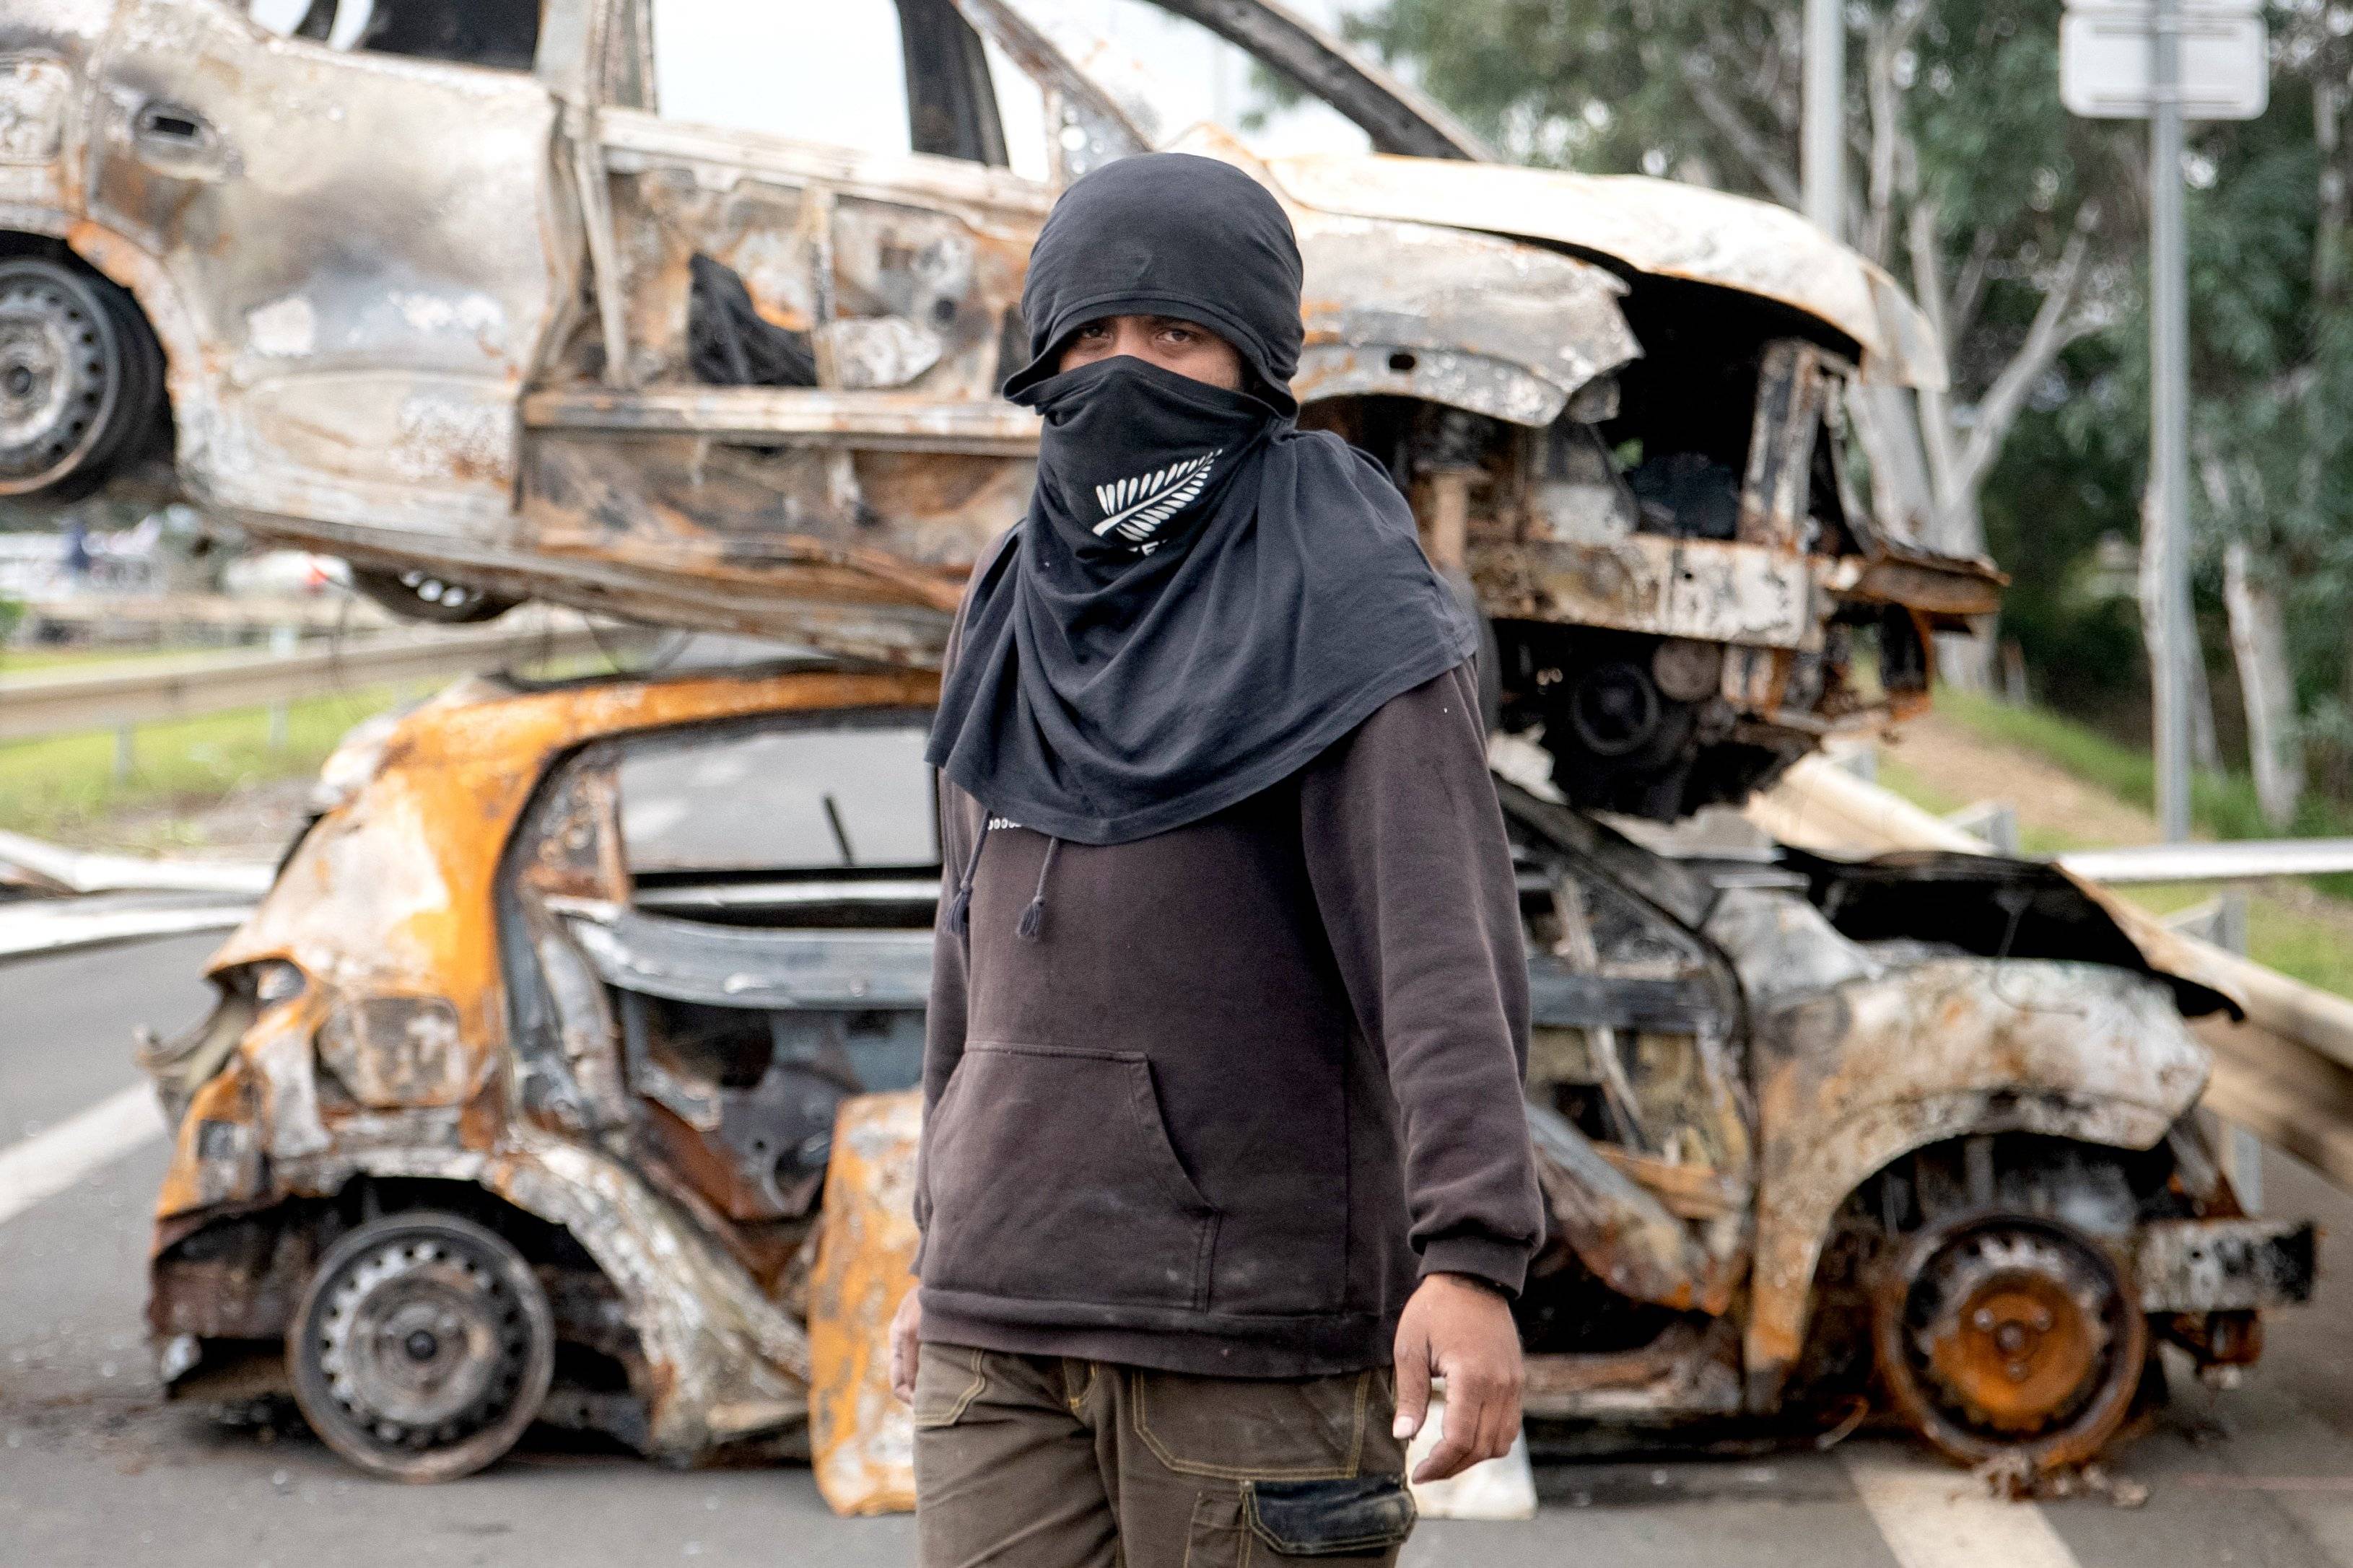 A bystander poses in front of burnt vehicles in a roadblock at the entrance to Ducos, France's Pacific territory of New Caledonia, on May 21, 2024. - The Pacific territory of 270,000 people has been in turmoil since May 13, when violence erupted over French plans to impose new voting rules that would give tens of thousands of non-indigenous residents voting rights.
The unrest has left six people dead, including two police, and hundreds injured. (Photo by Delphine Mayeur / AFP)